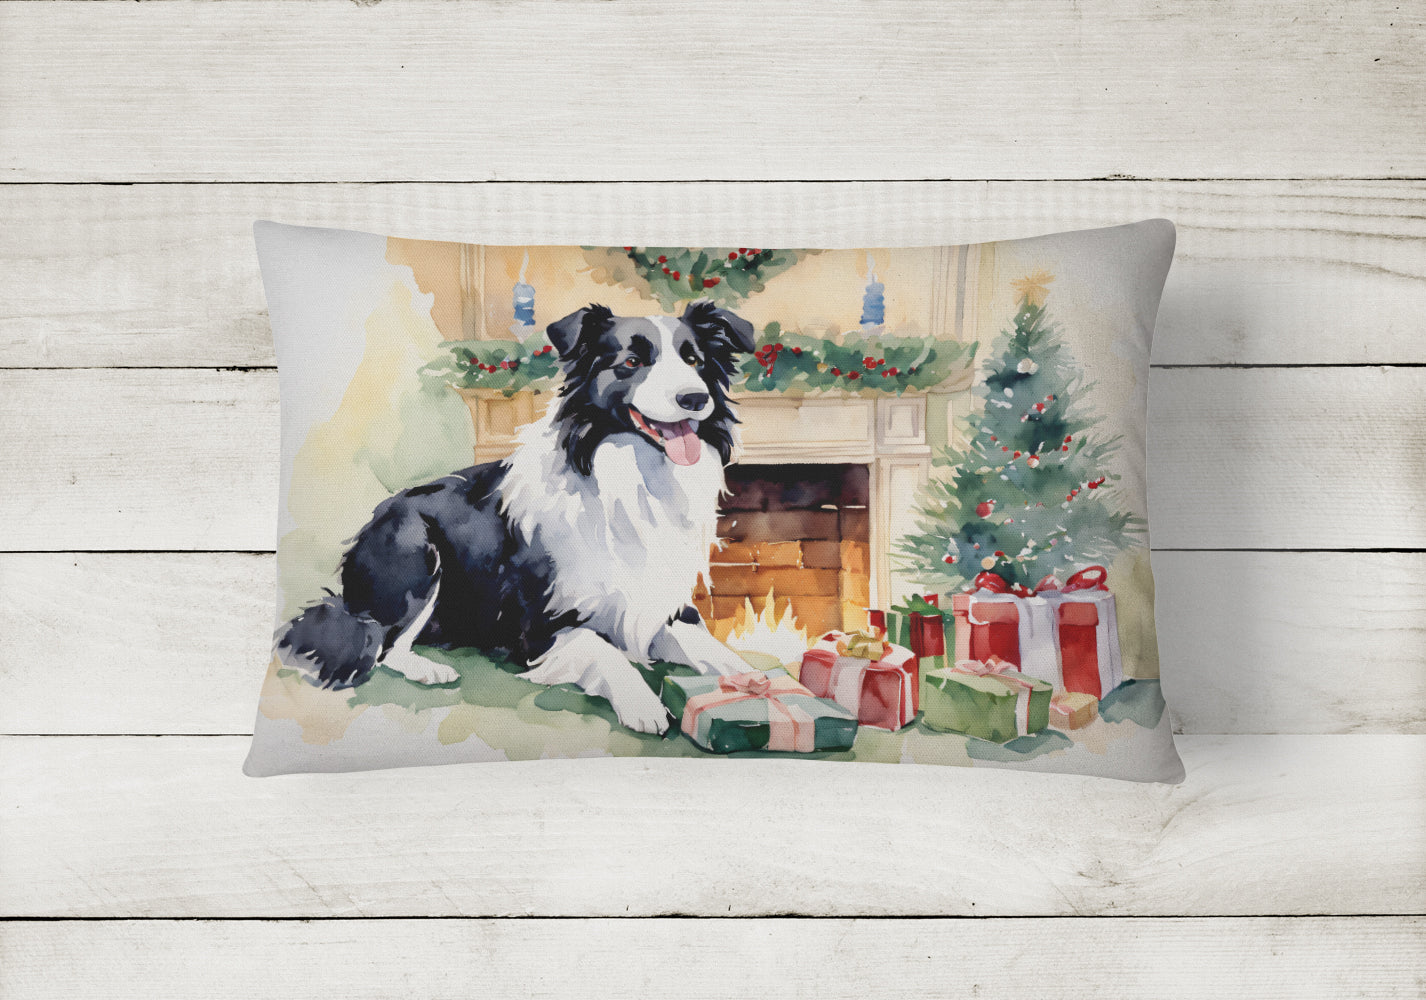 Buy this Border Collie Christmas Fabric Decorative Pillow